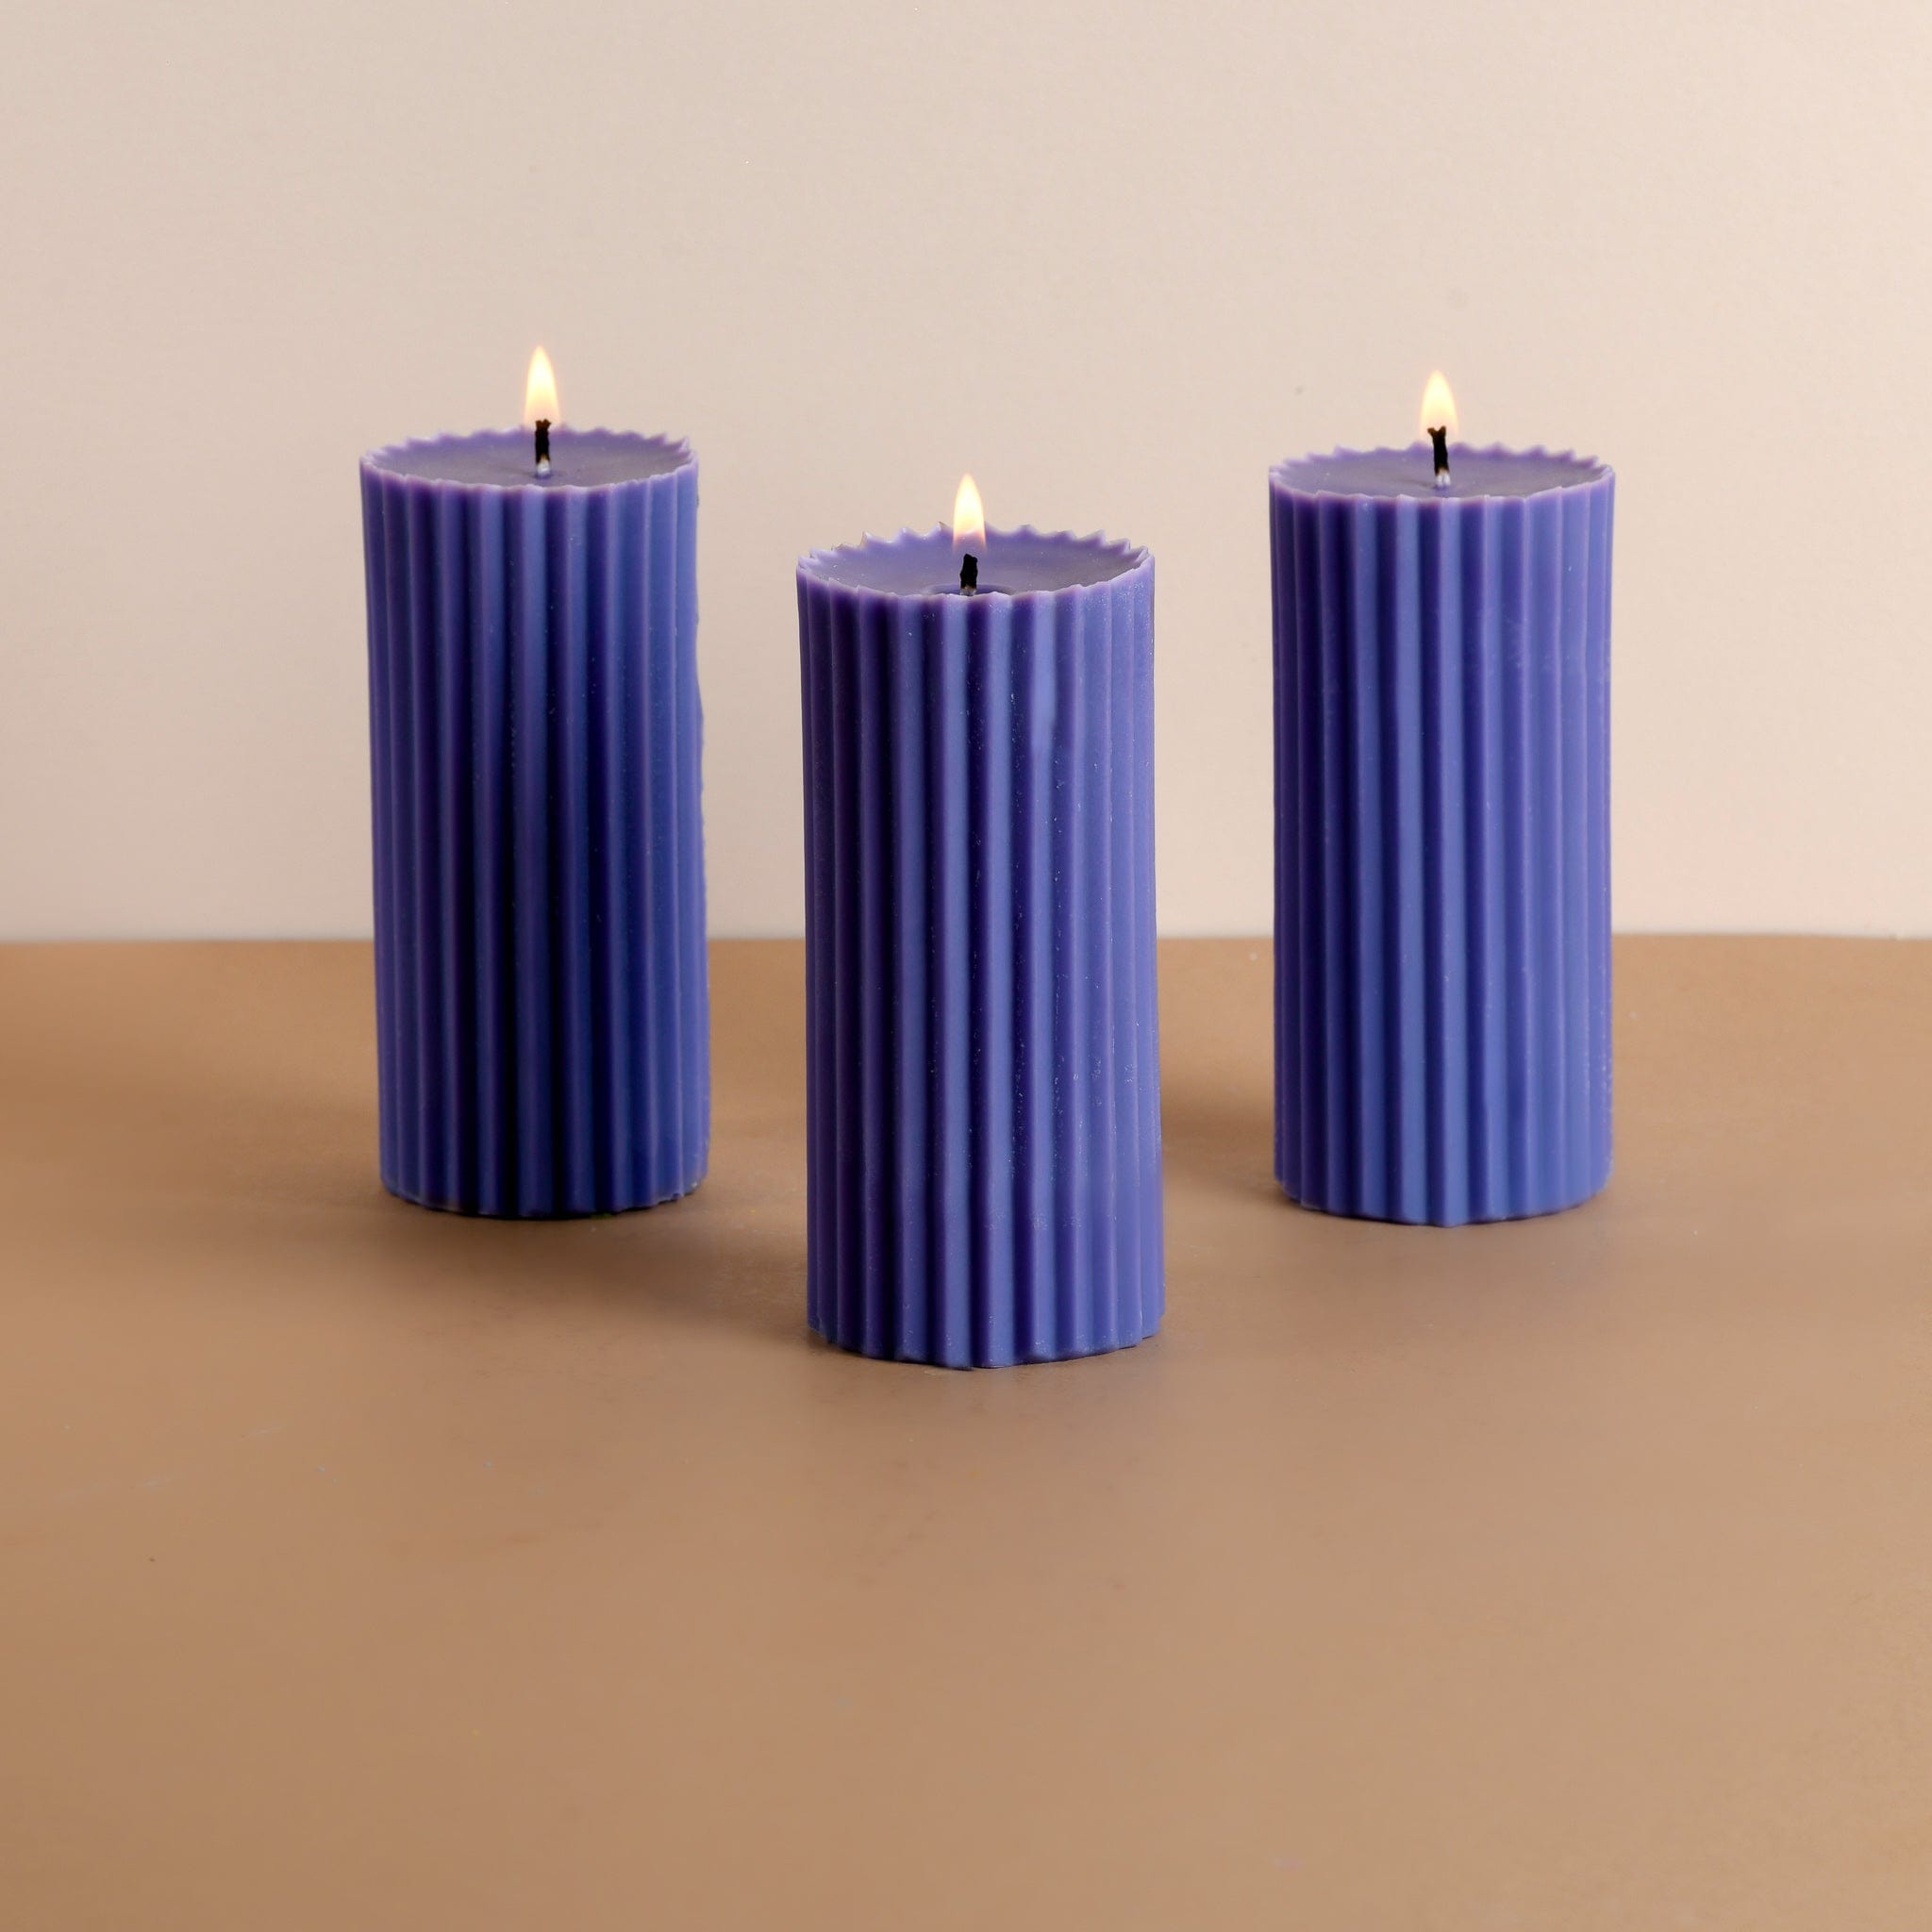 Combo of 3 Powder Blue 'Belief' Candles - Oceanic Mist Scented